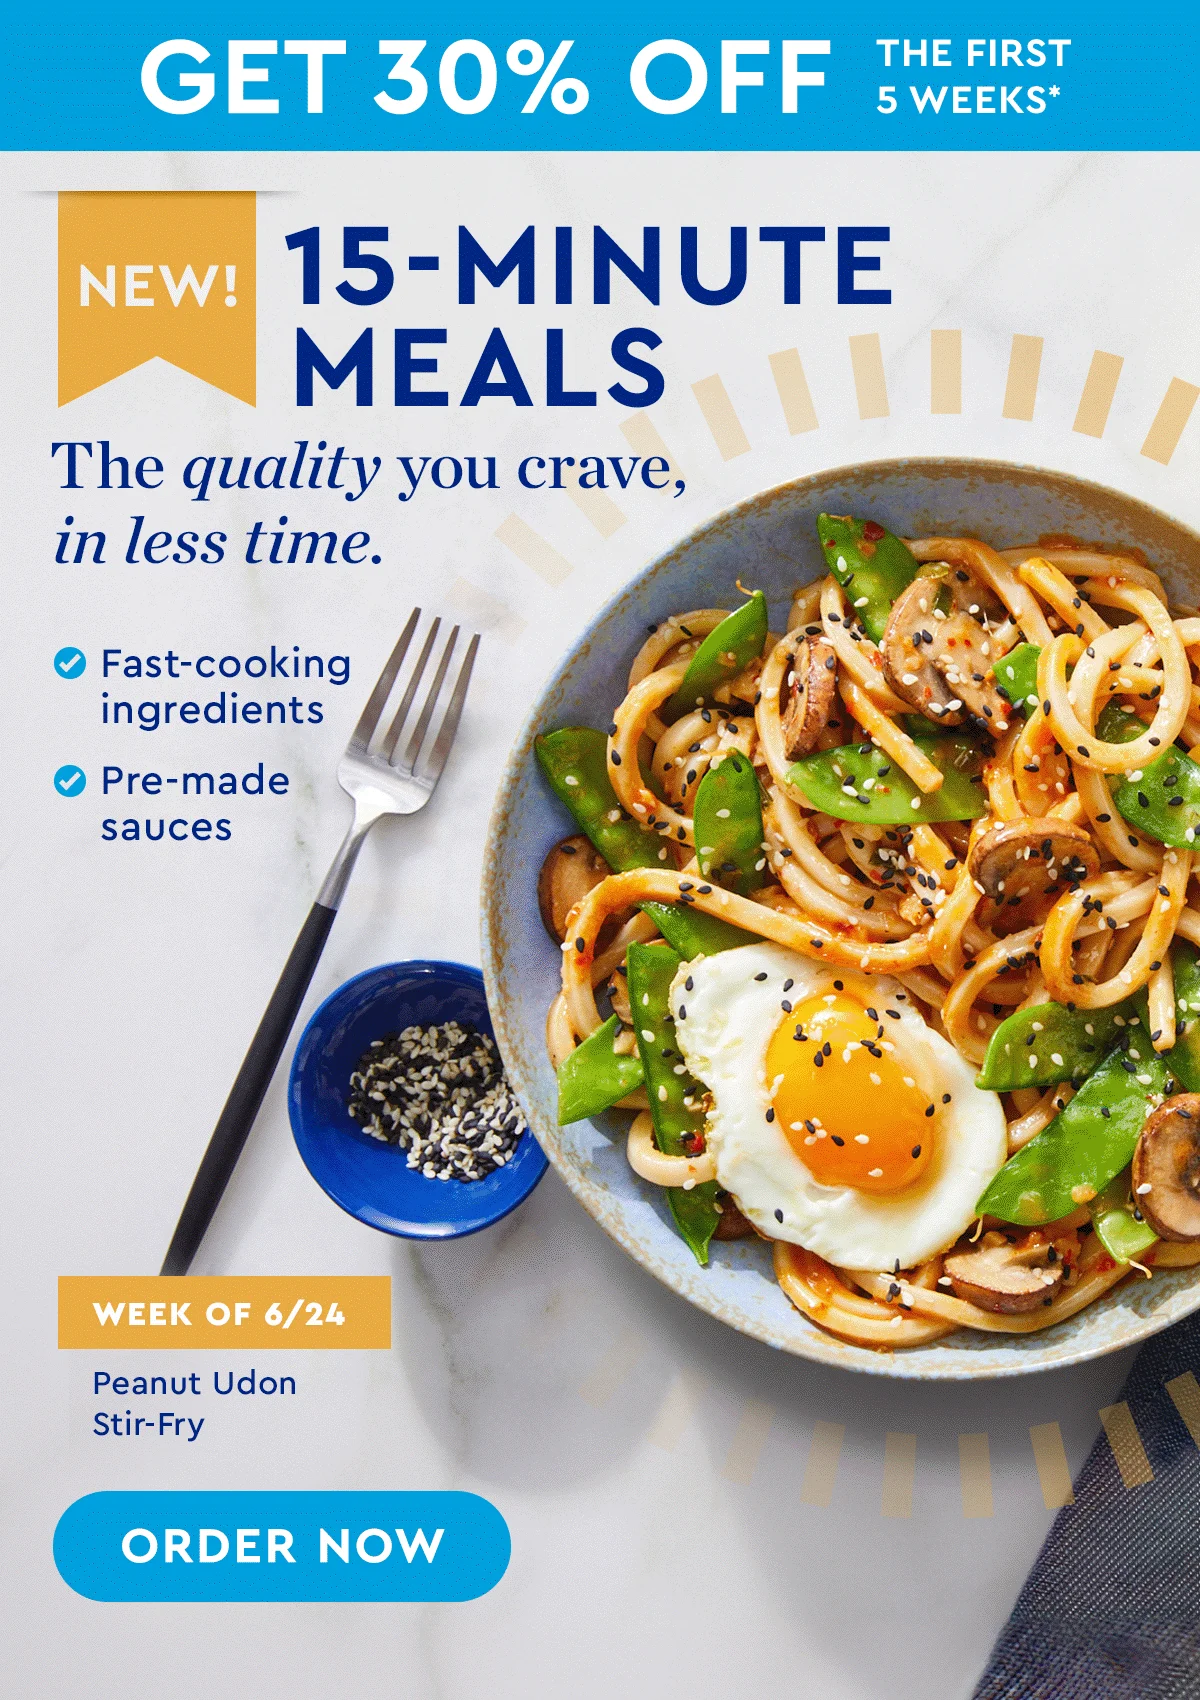 GET 30% OFF THE FIRST 5 WEEKS* | New! 15-Minute Meals | The quality you crave, in less time. | ORDER NOW | Fast-cooking ingredients | Pre-made sauces